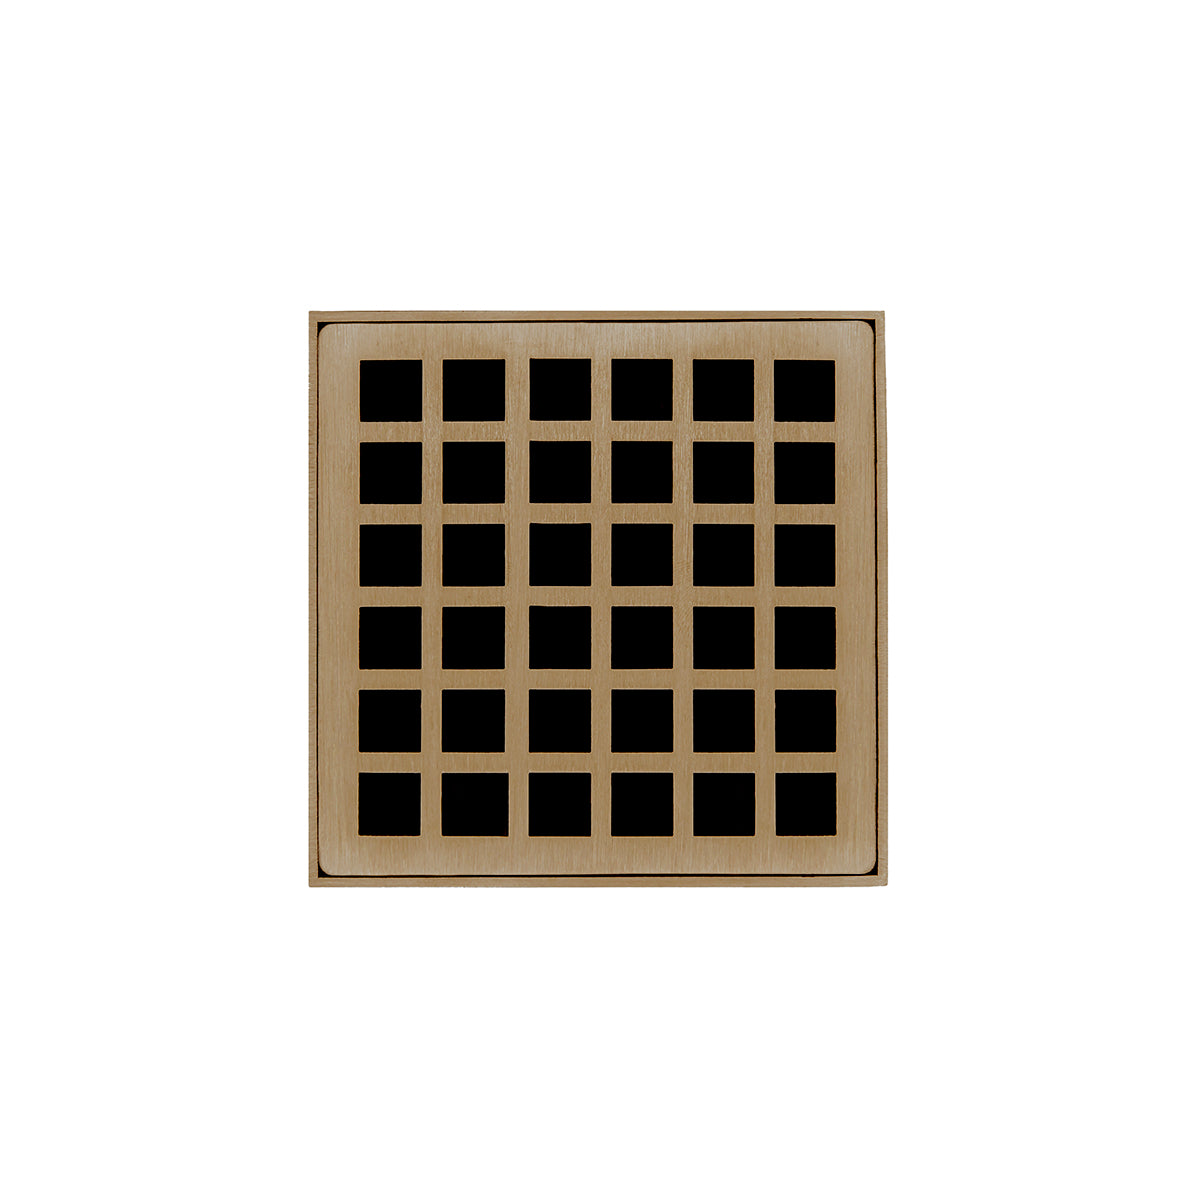 Infinity Drain 4" x 4" Strainer Premium Center Drain Kit with Squares Pattern Decorative Plate and 2" Throat for QD 4